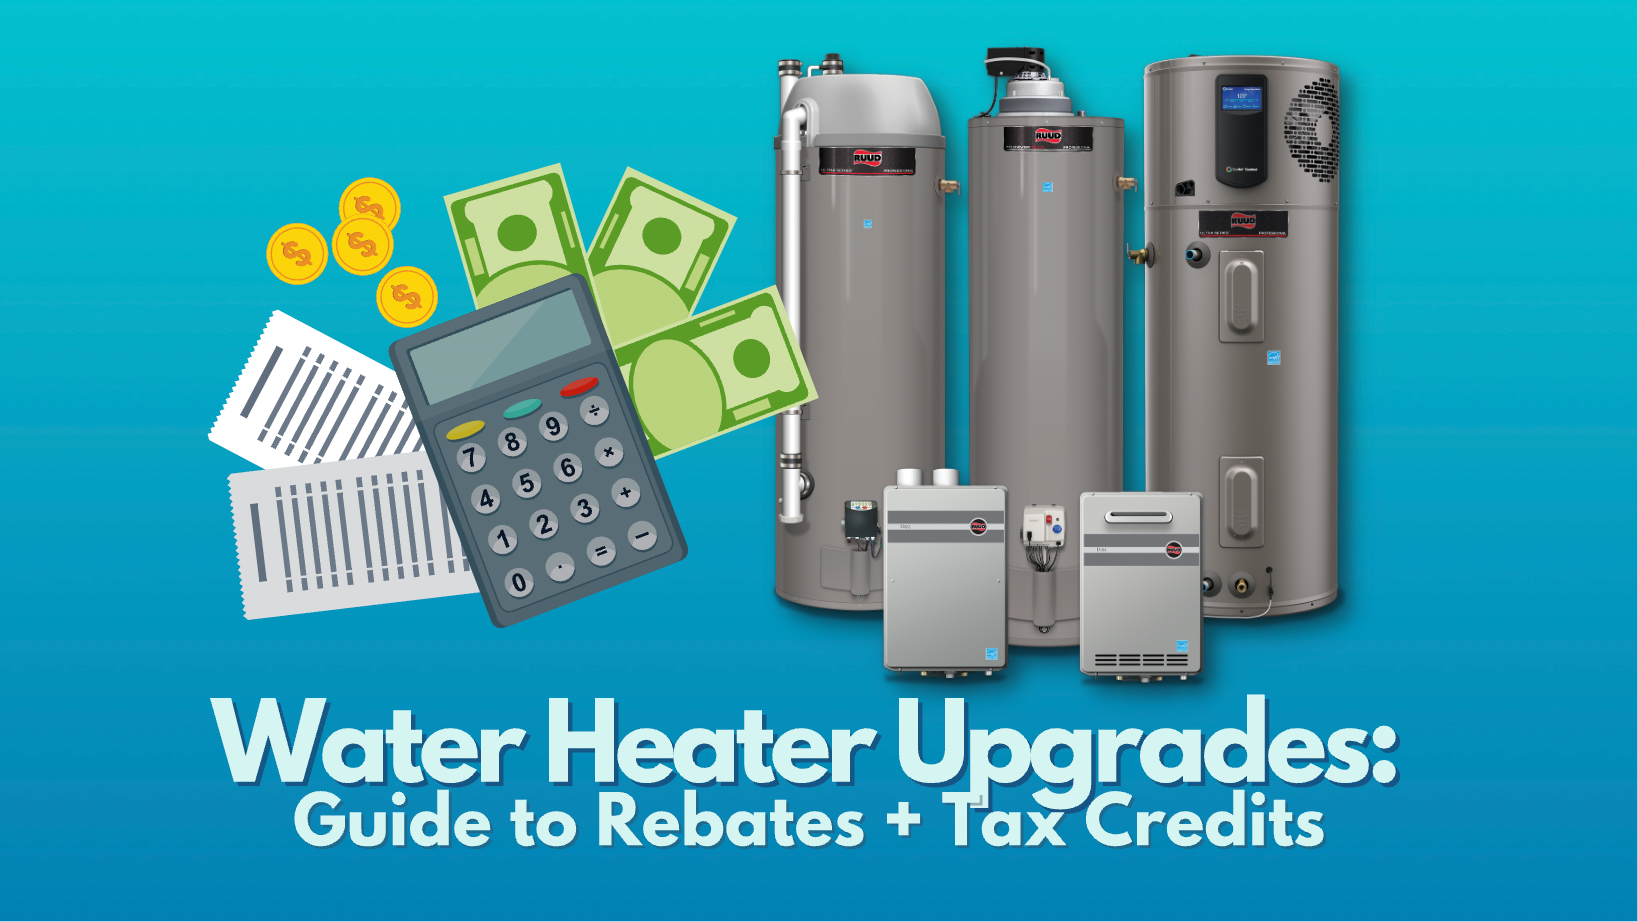 Ruud High Efficiency Water Heater Product Group with money and tax icons on blue background